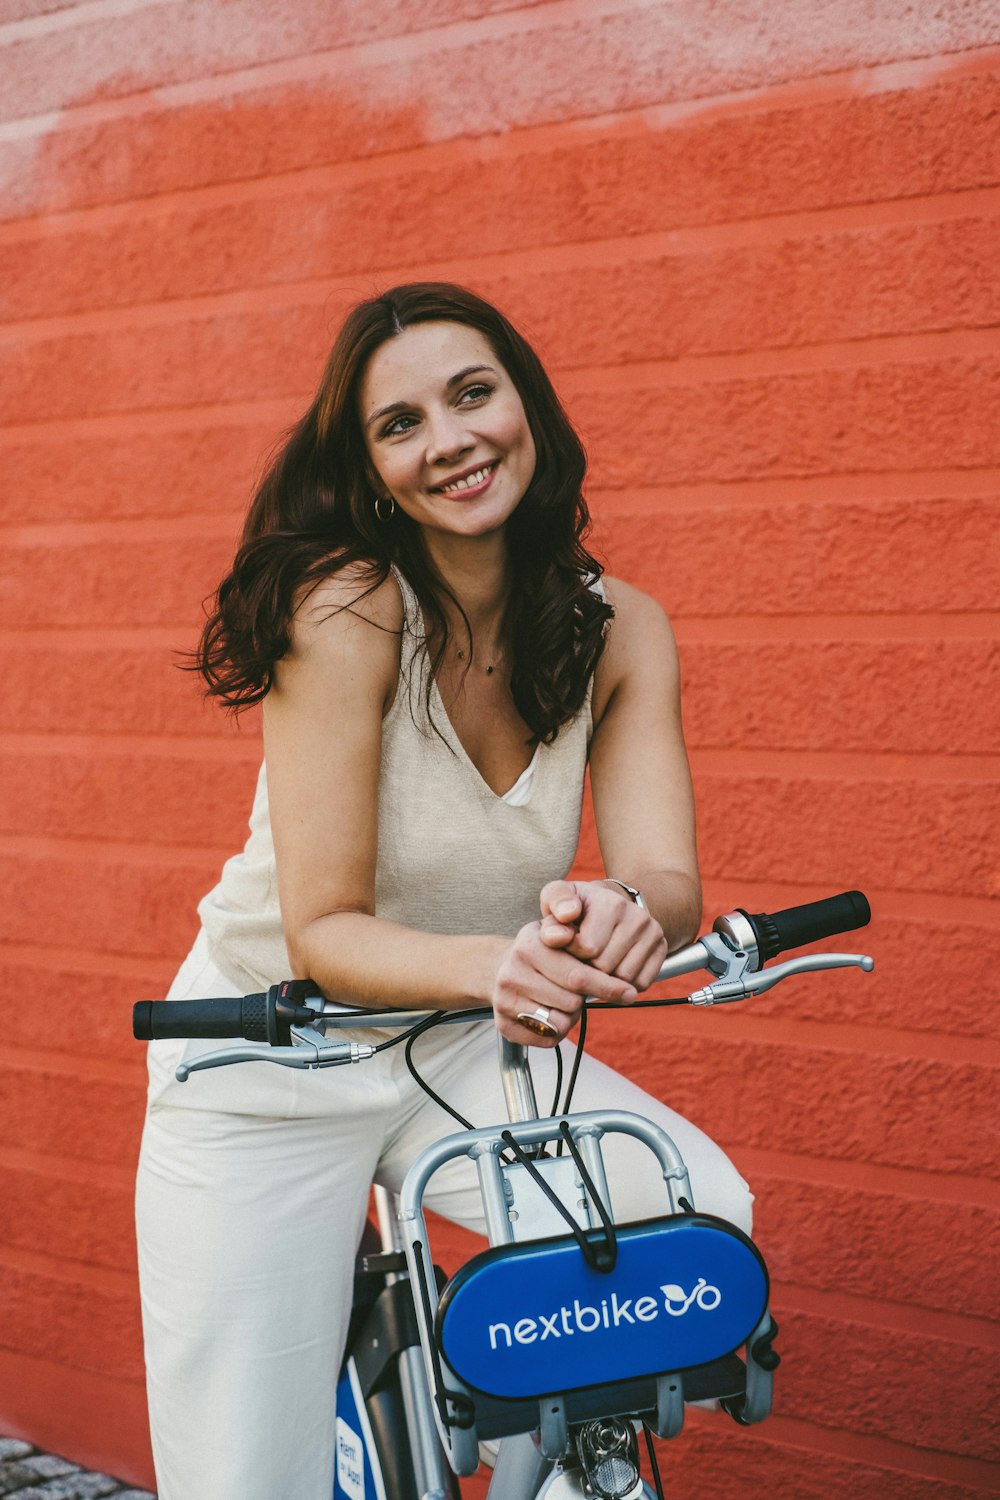 woman in brown tank top riding on bicycle